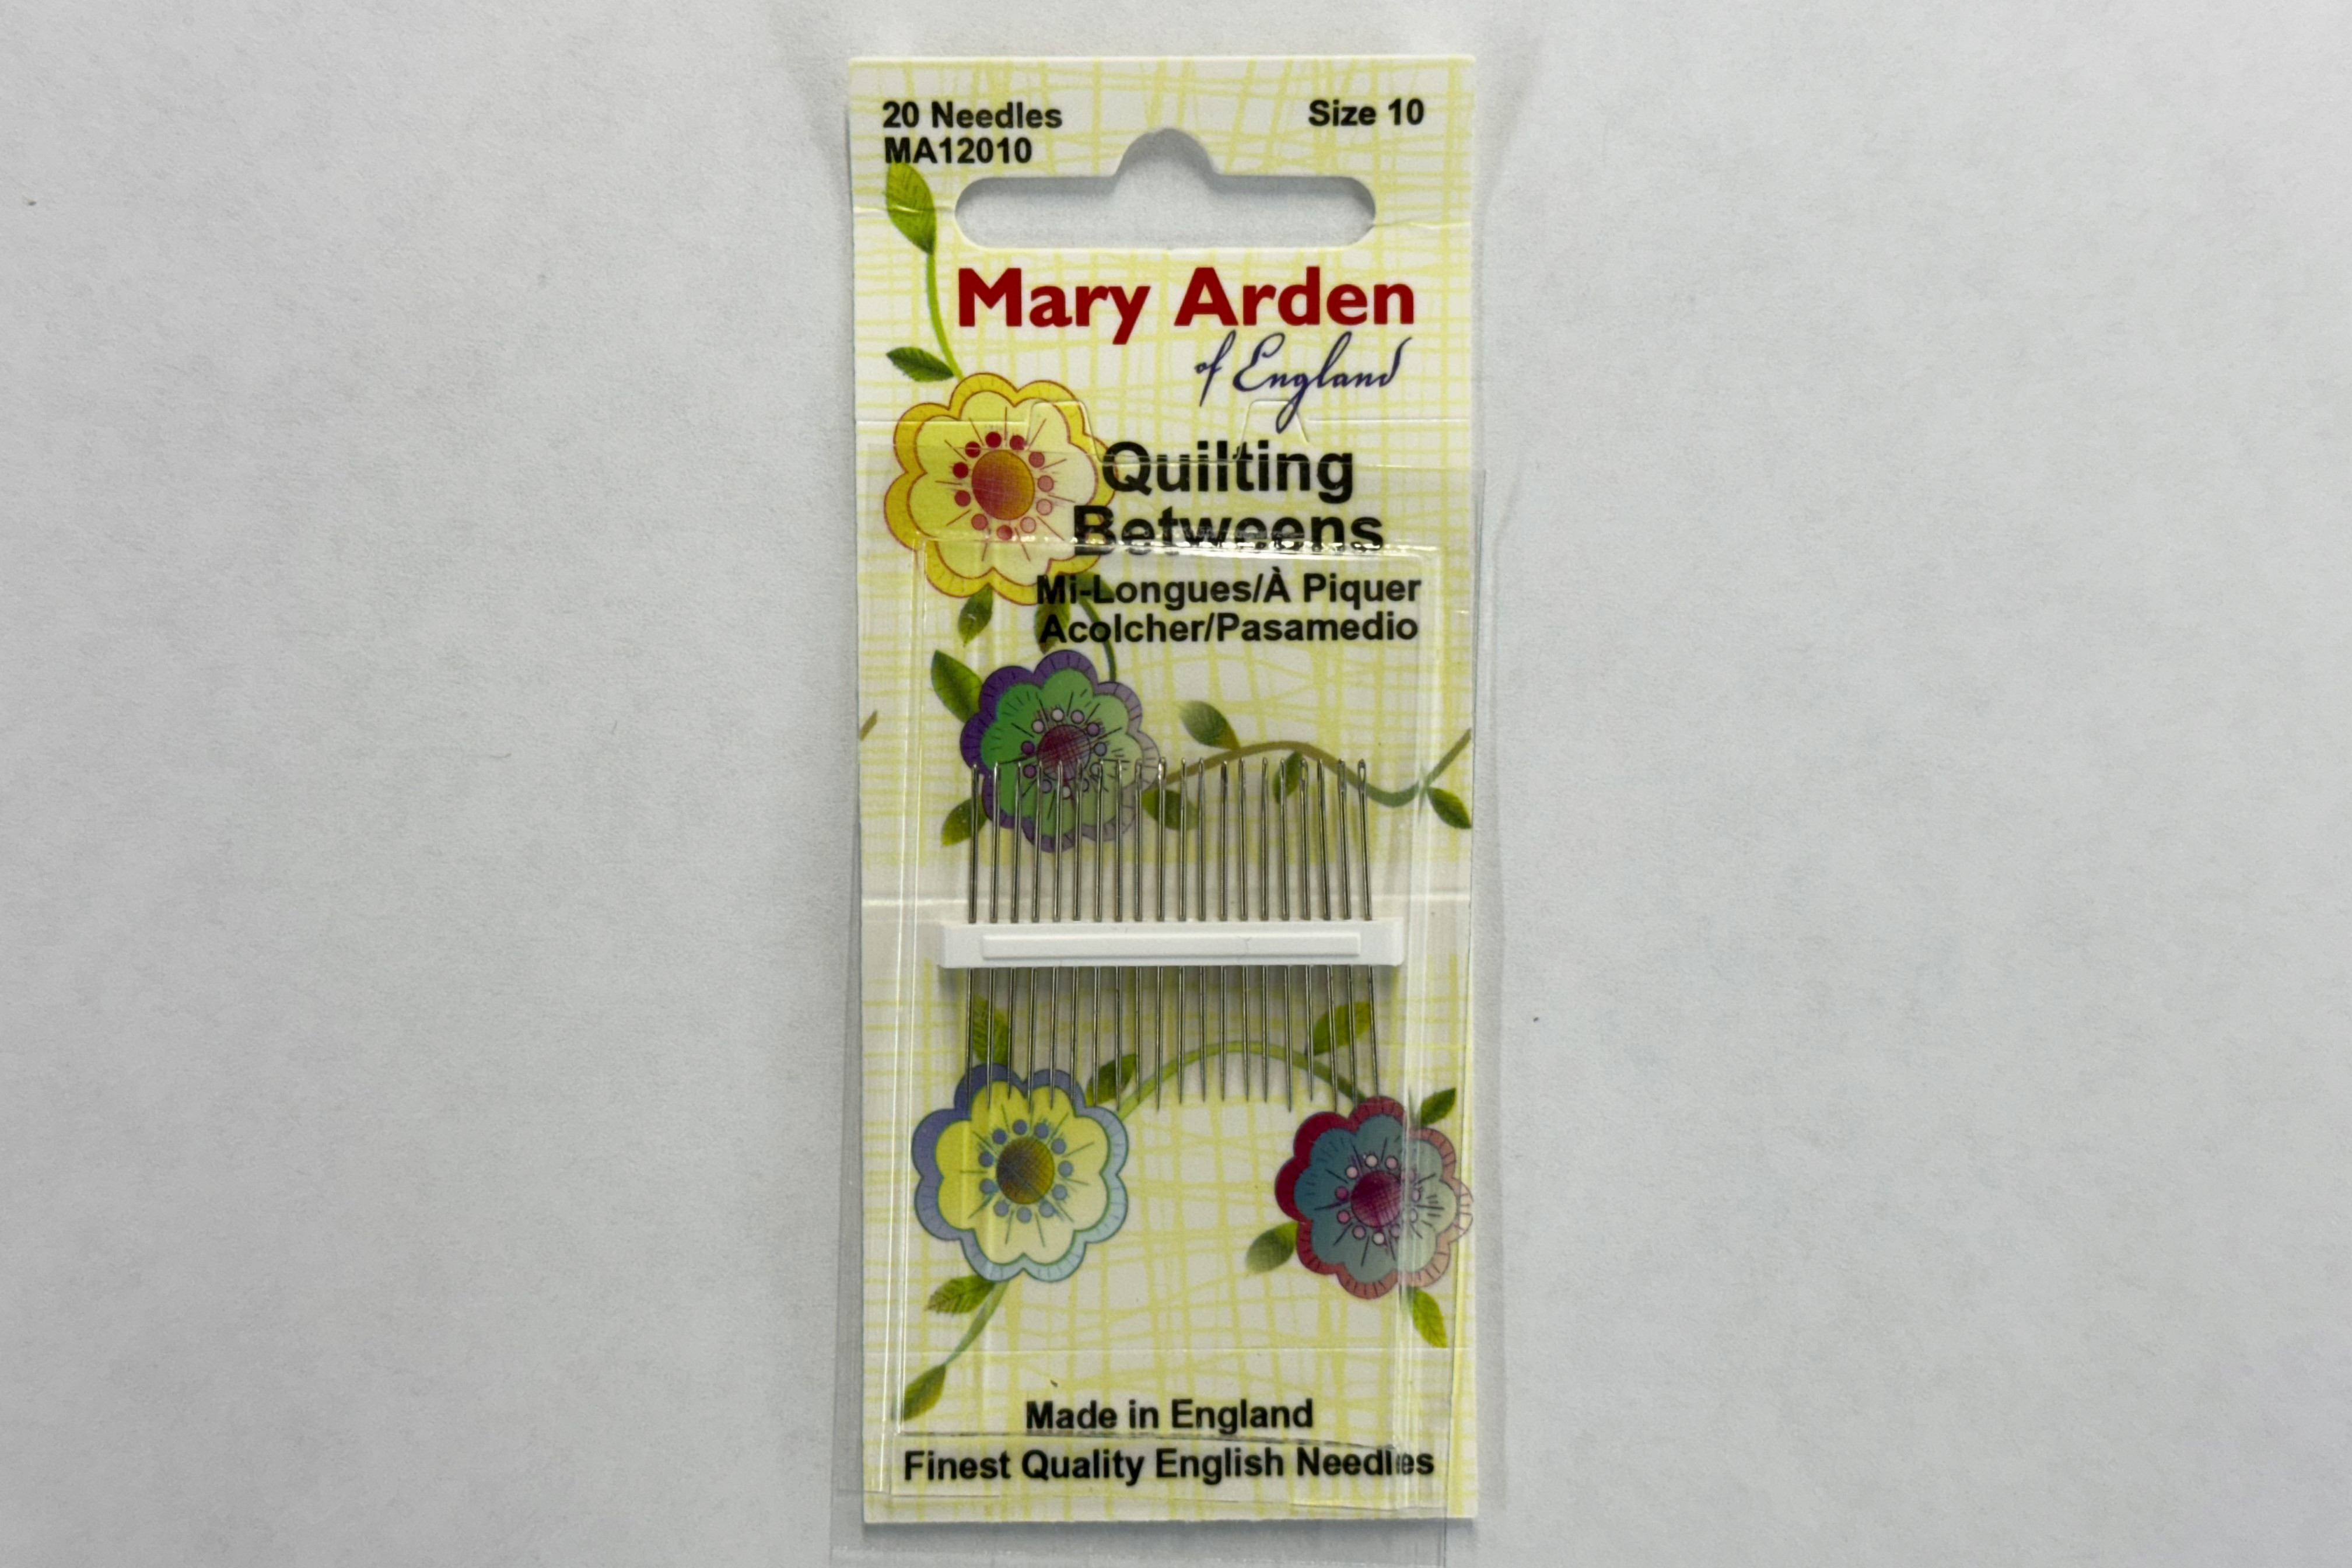 Mary Arden Needles - Quilting/ Betweens